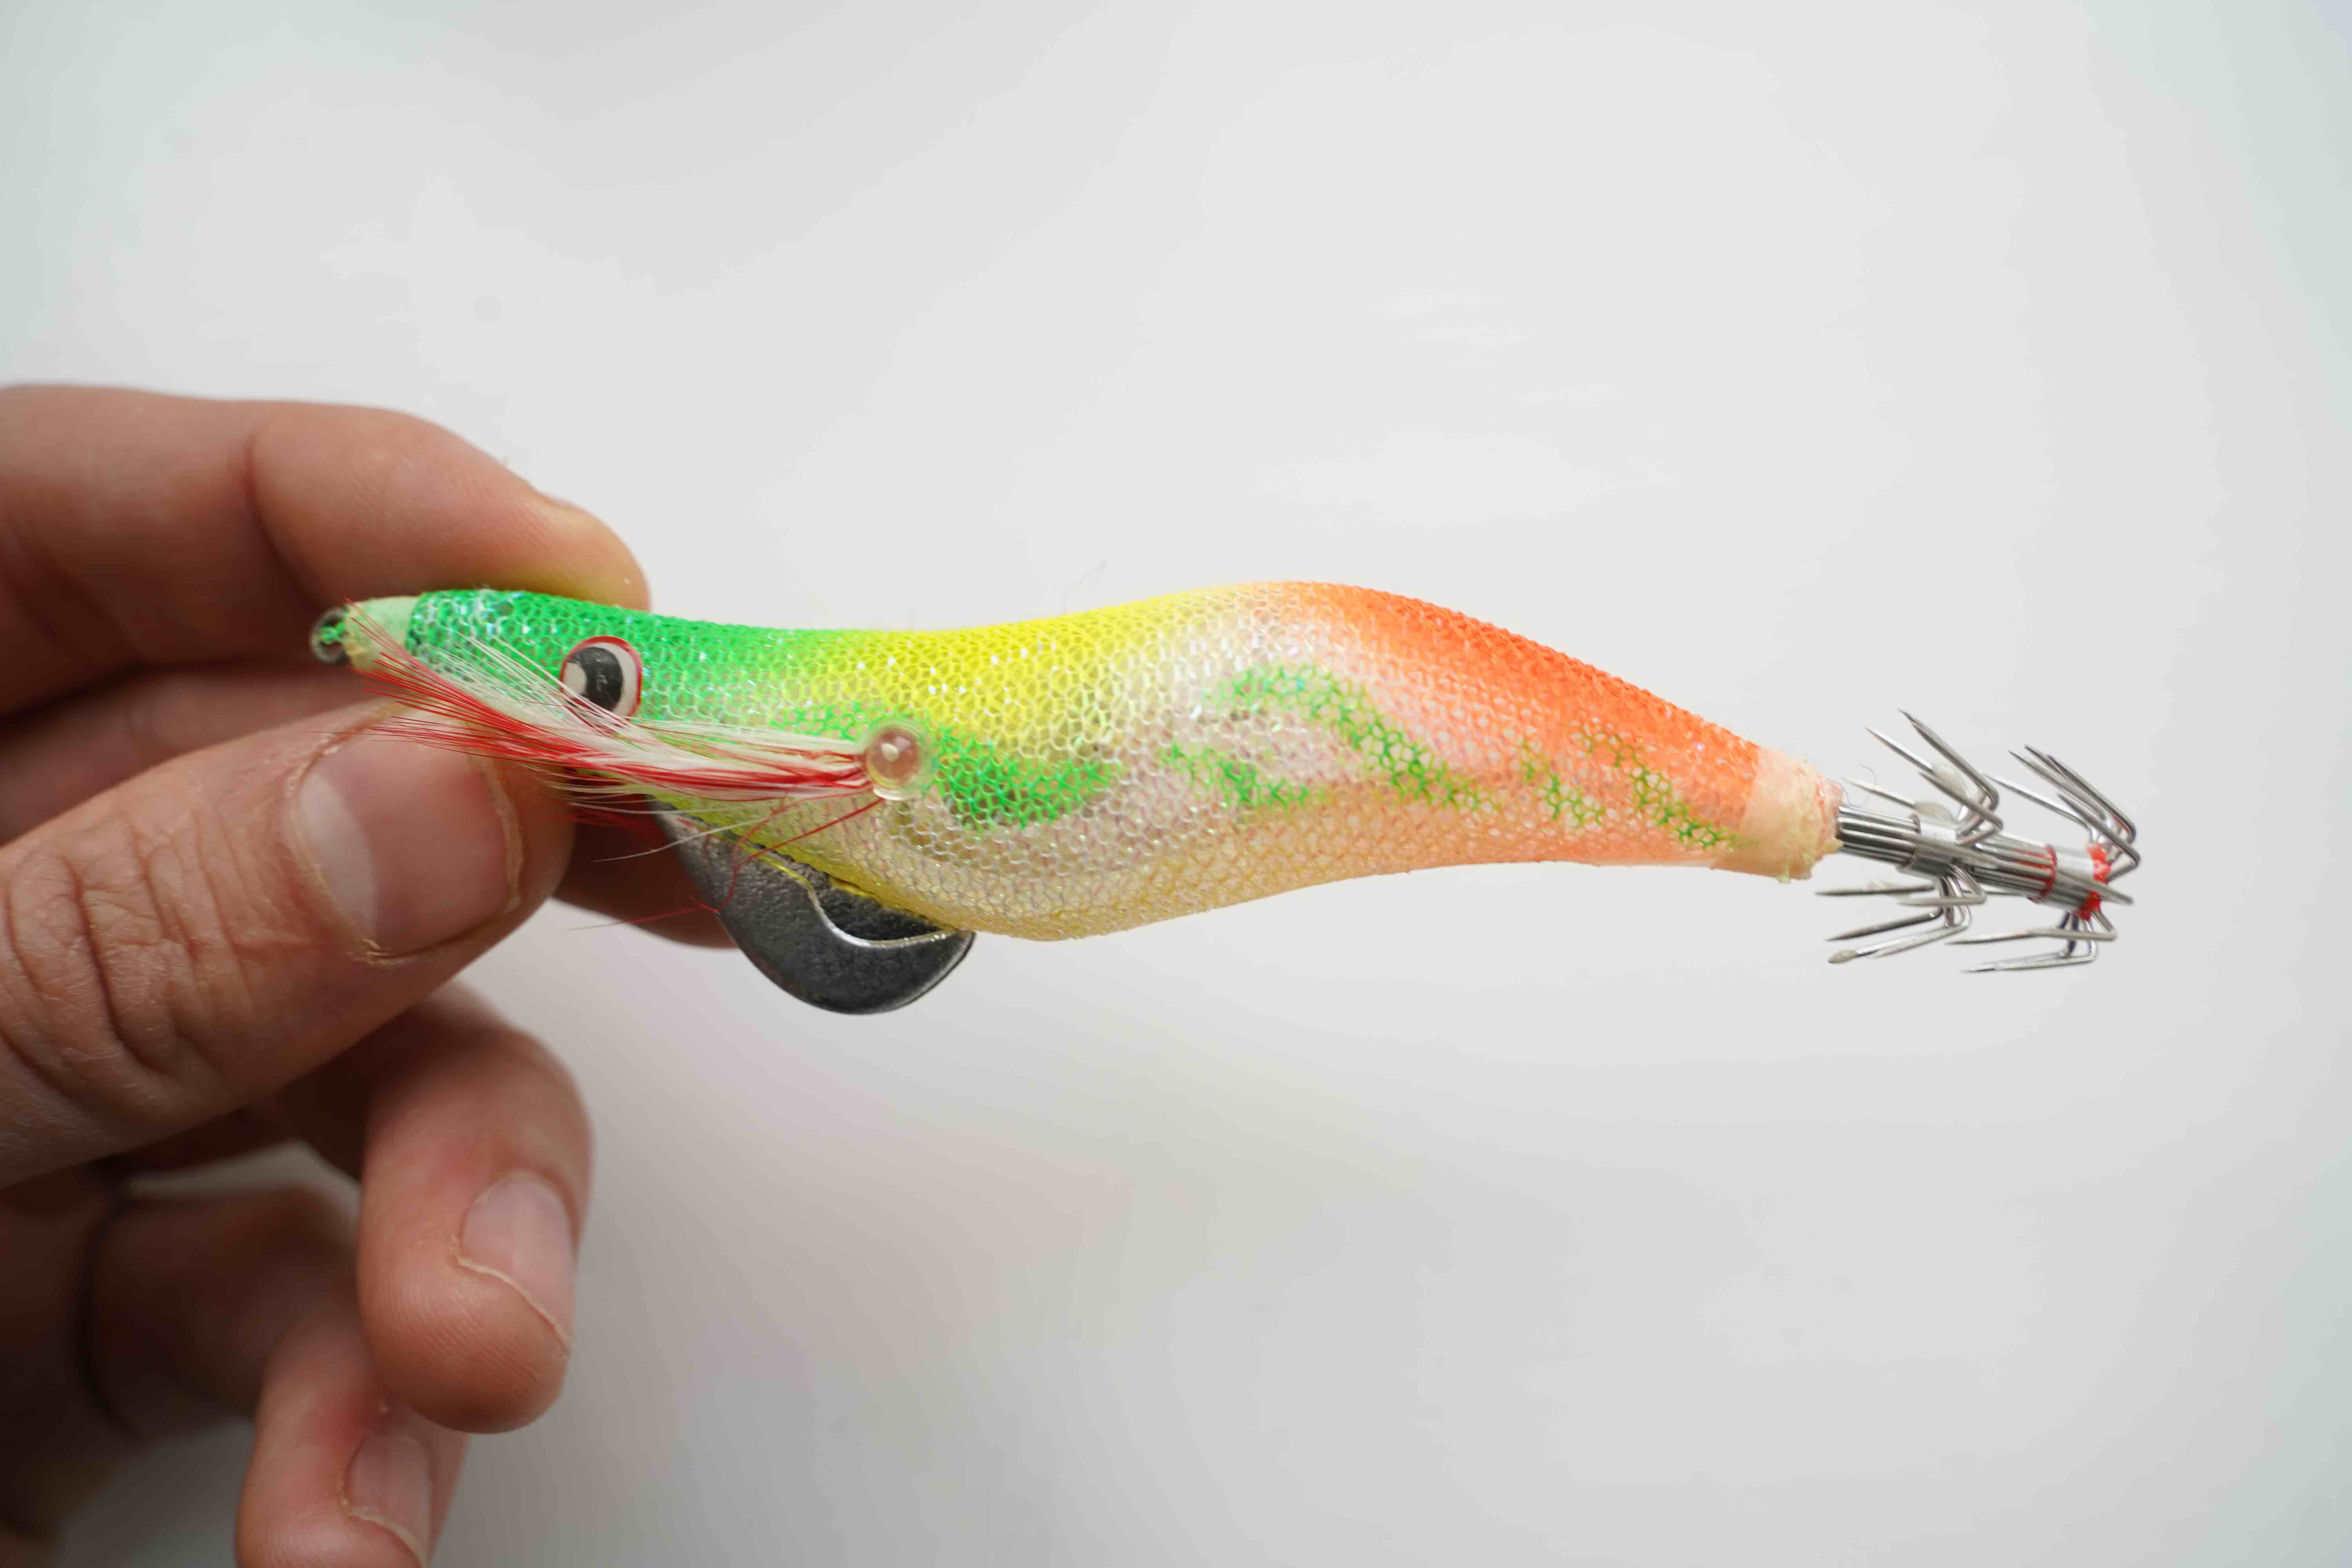 Squid Jig, Let's Make a Jig From Soft Plastic 